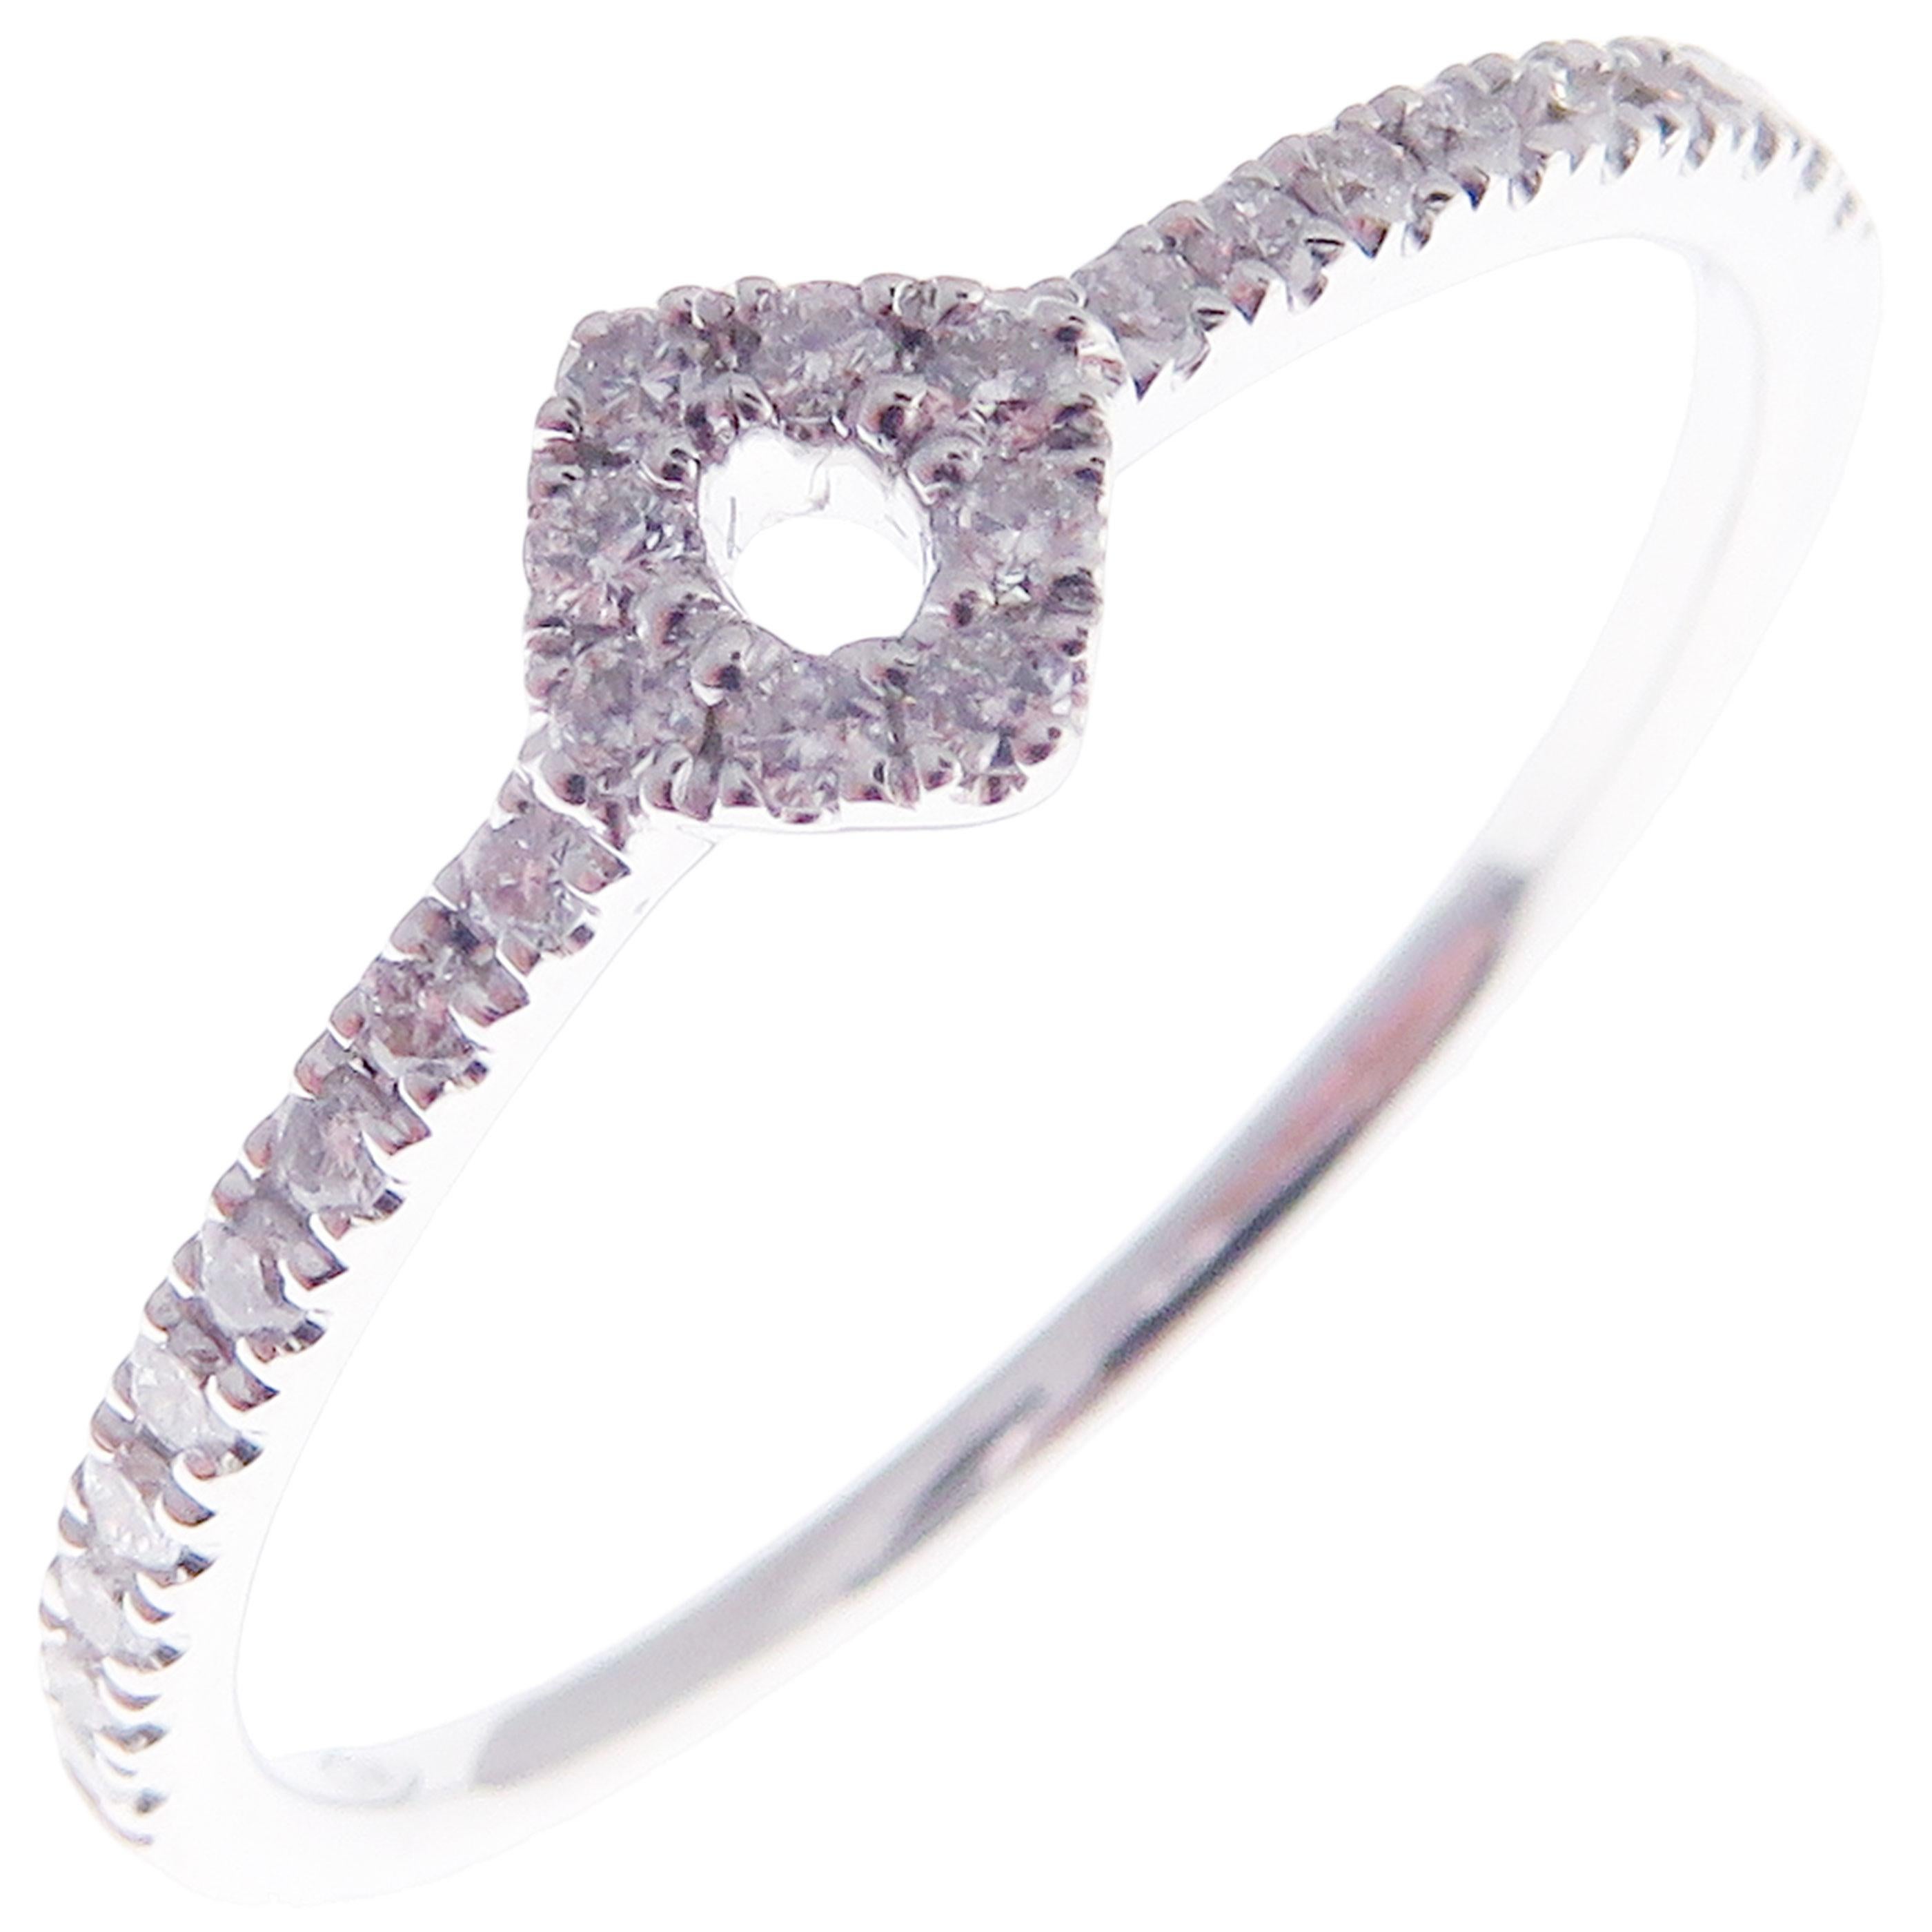 This trendy simple stackable ring is crafted in 18-karat white gold, featuring 26 round white diamonds totaling of 0.19 carats.
Approximate total weight 1.40 grams.
Standard Ring size 7
SI-G Quality natural white diamonds.